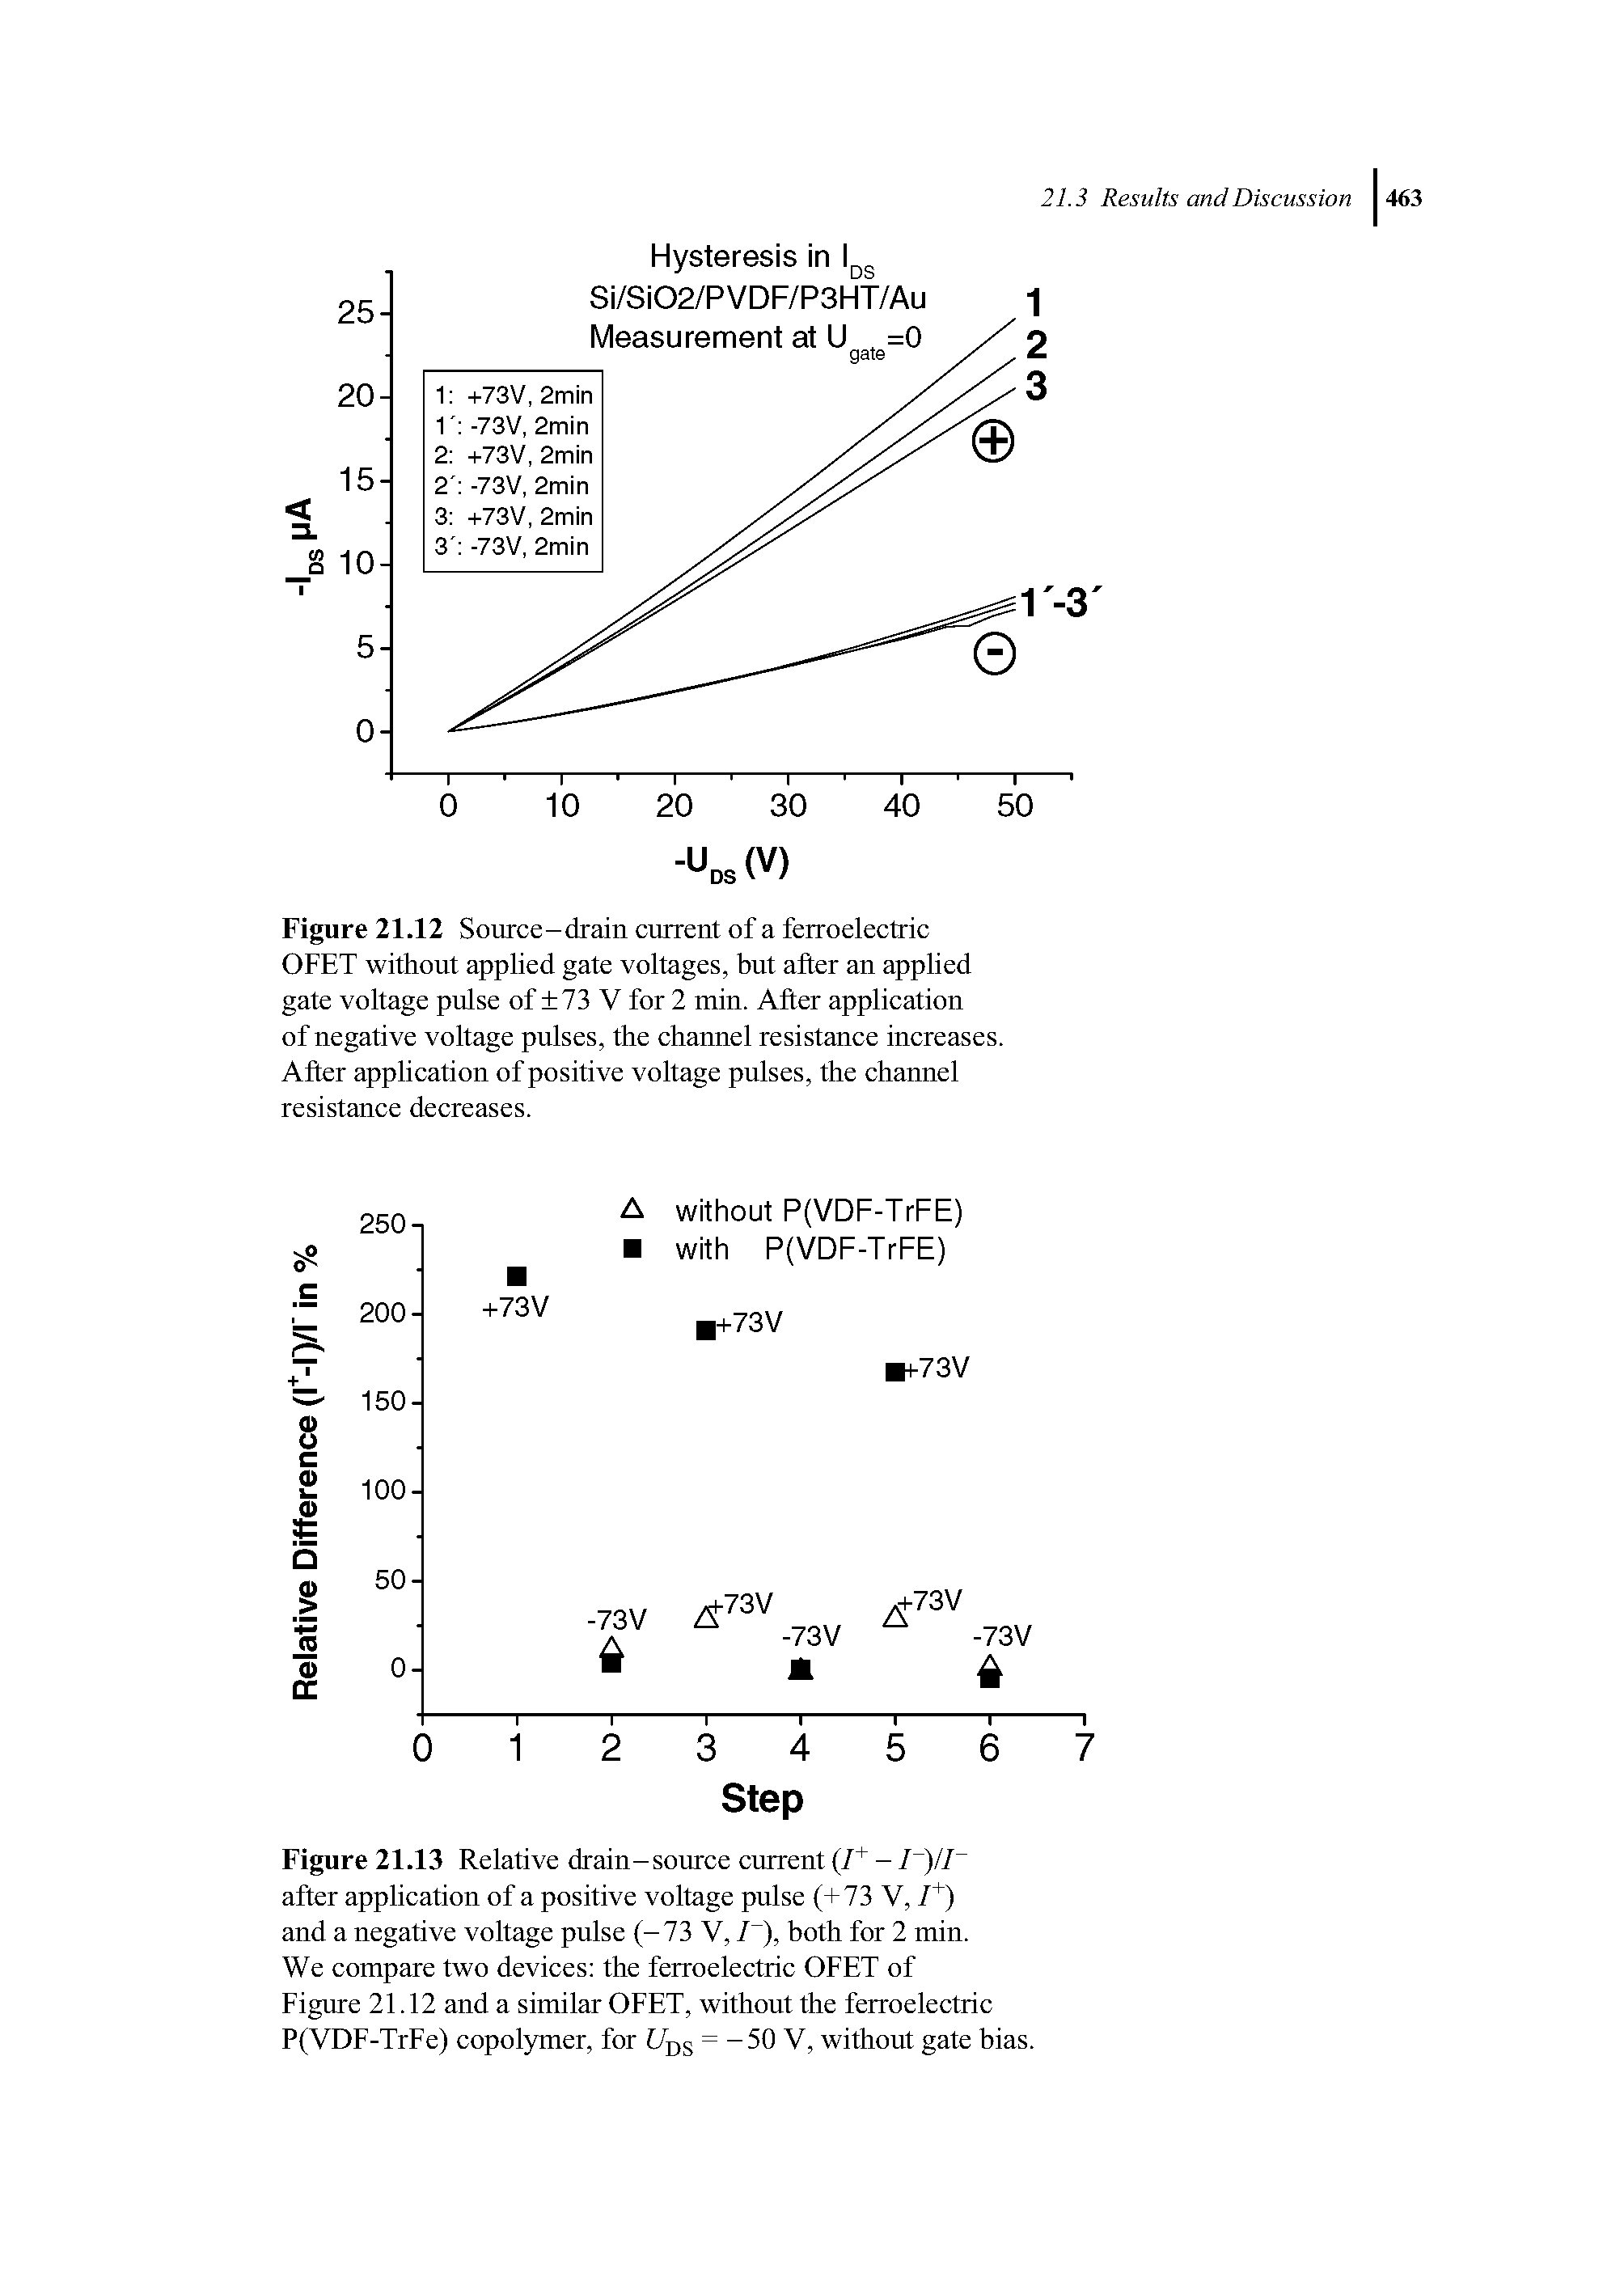 Figure 21.12 Source-drain current of a ferroelectric OFET without applied gate voltages, but after an applied gate voltage pulse of 73 V for 2 min. After application of negative voltage pulses, the channel resistance increases. After application of positive voltage pulses, the channel resistance decreases.